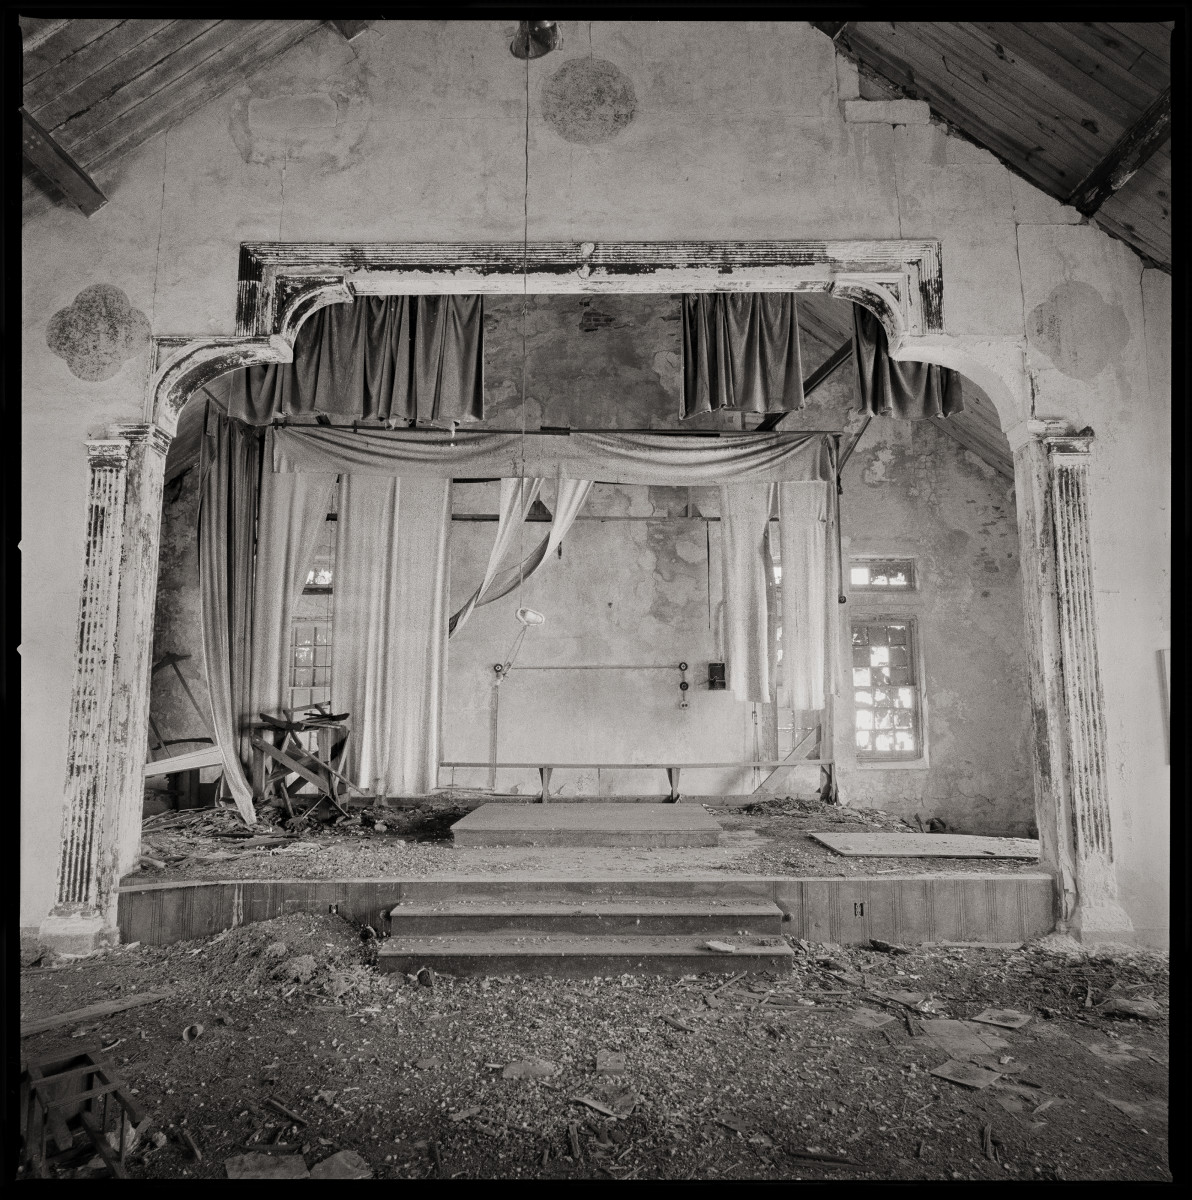 Chapel & Theater by Eric T. Kunsman  Image: ID: A black and white image shows a theater stage with curtains.  There is dirt and debris around and in front of the stage.